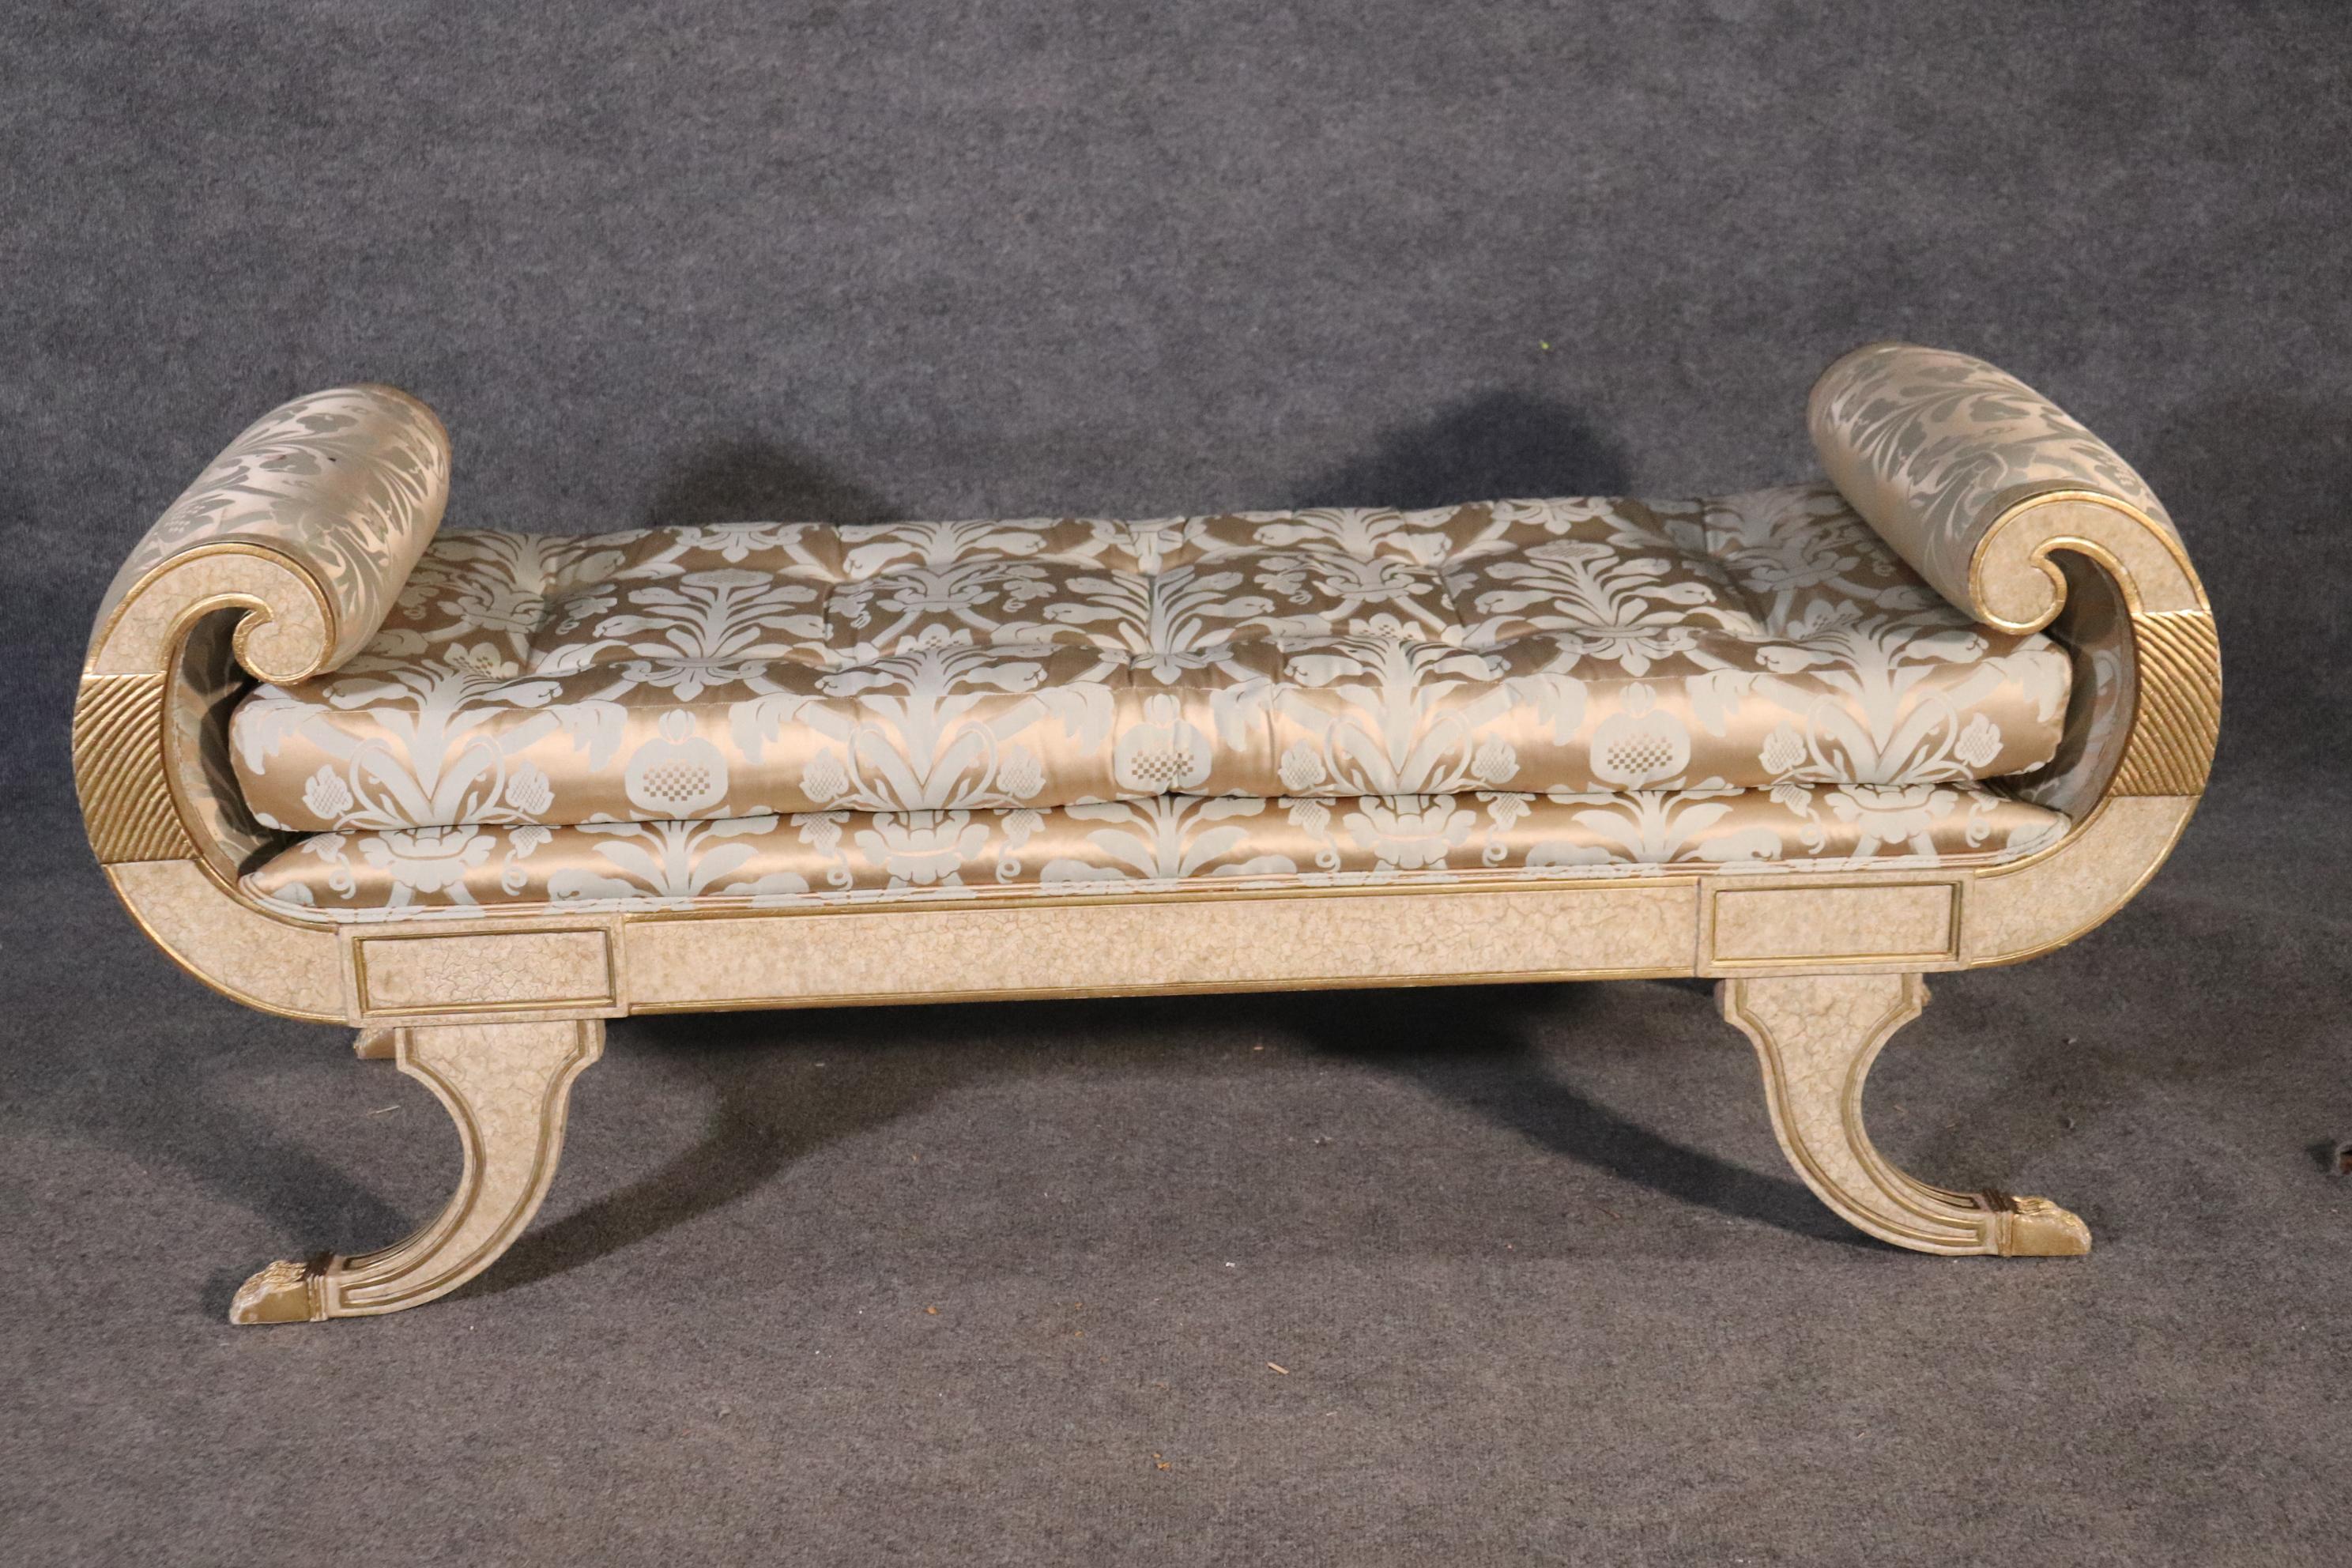 This is a fantastic silver leafed gilded crème painted chaise or window bench. The piece is in good condition but will show some signs of wear and stains from use. The bench measures 56 wide x 20 deep x 22 tall and the seat height is 18 inches tall.